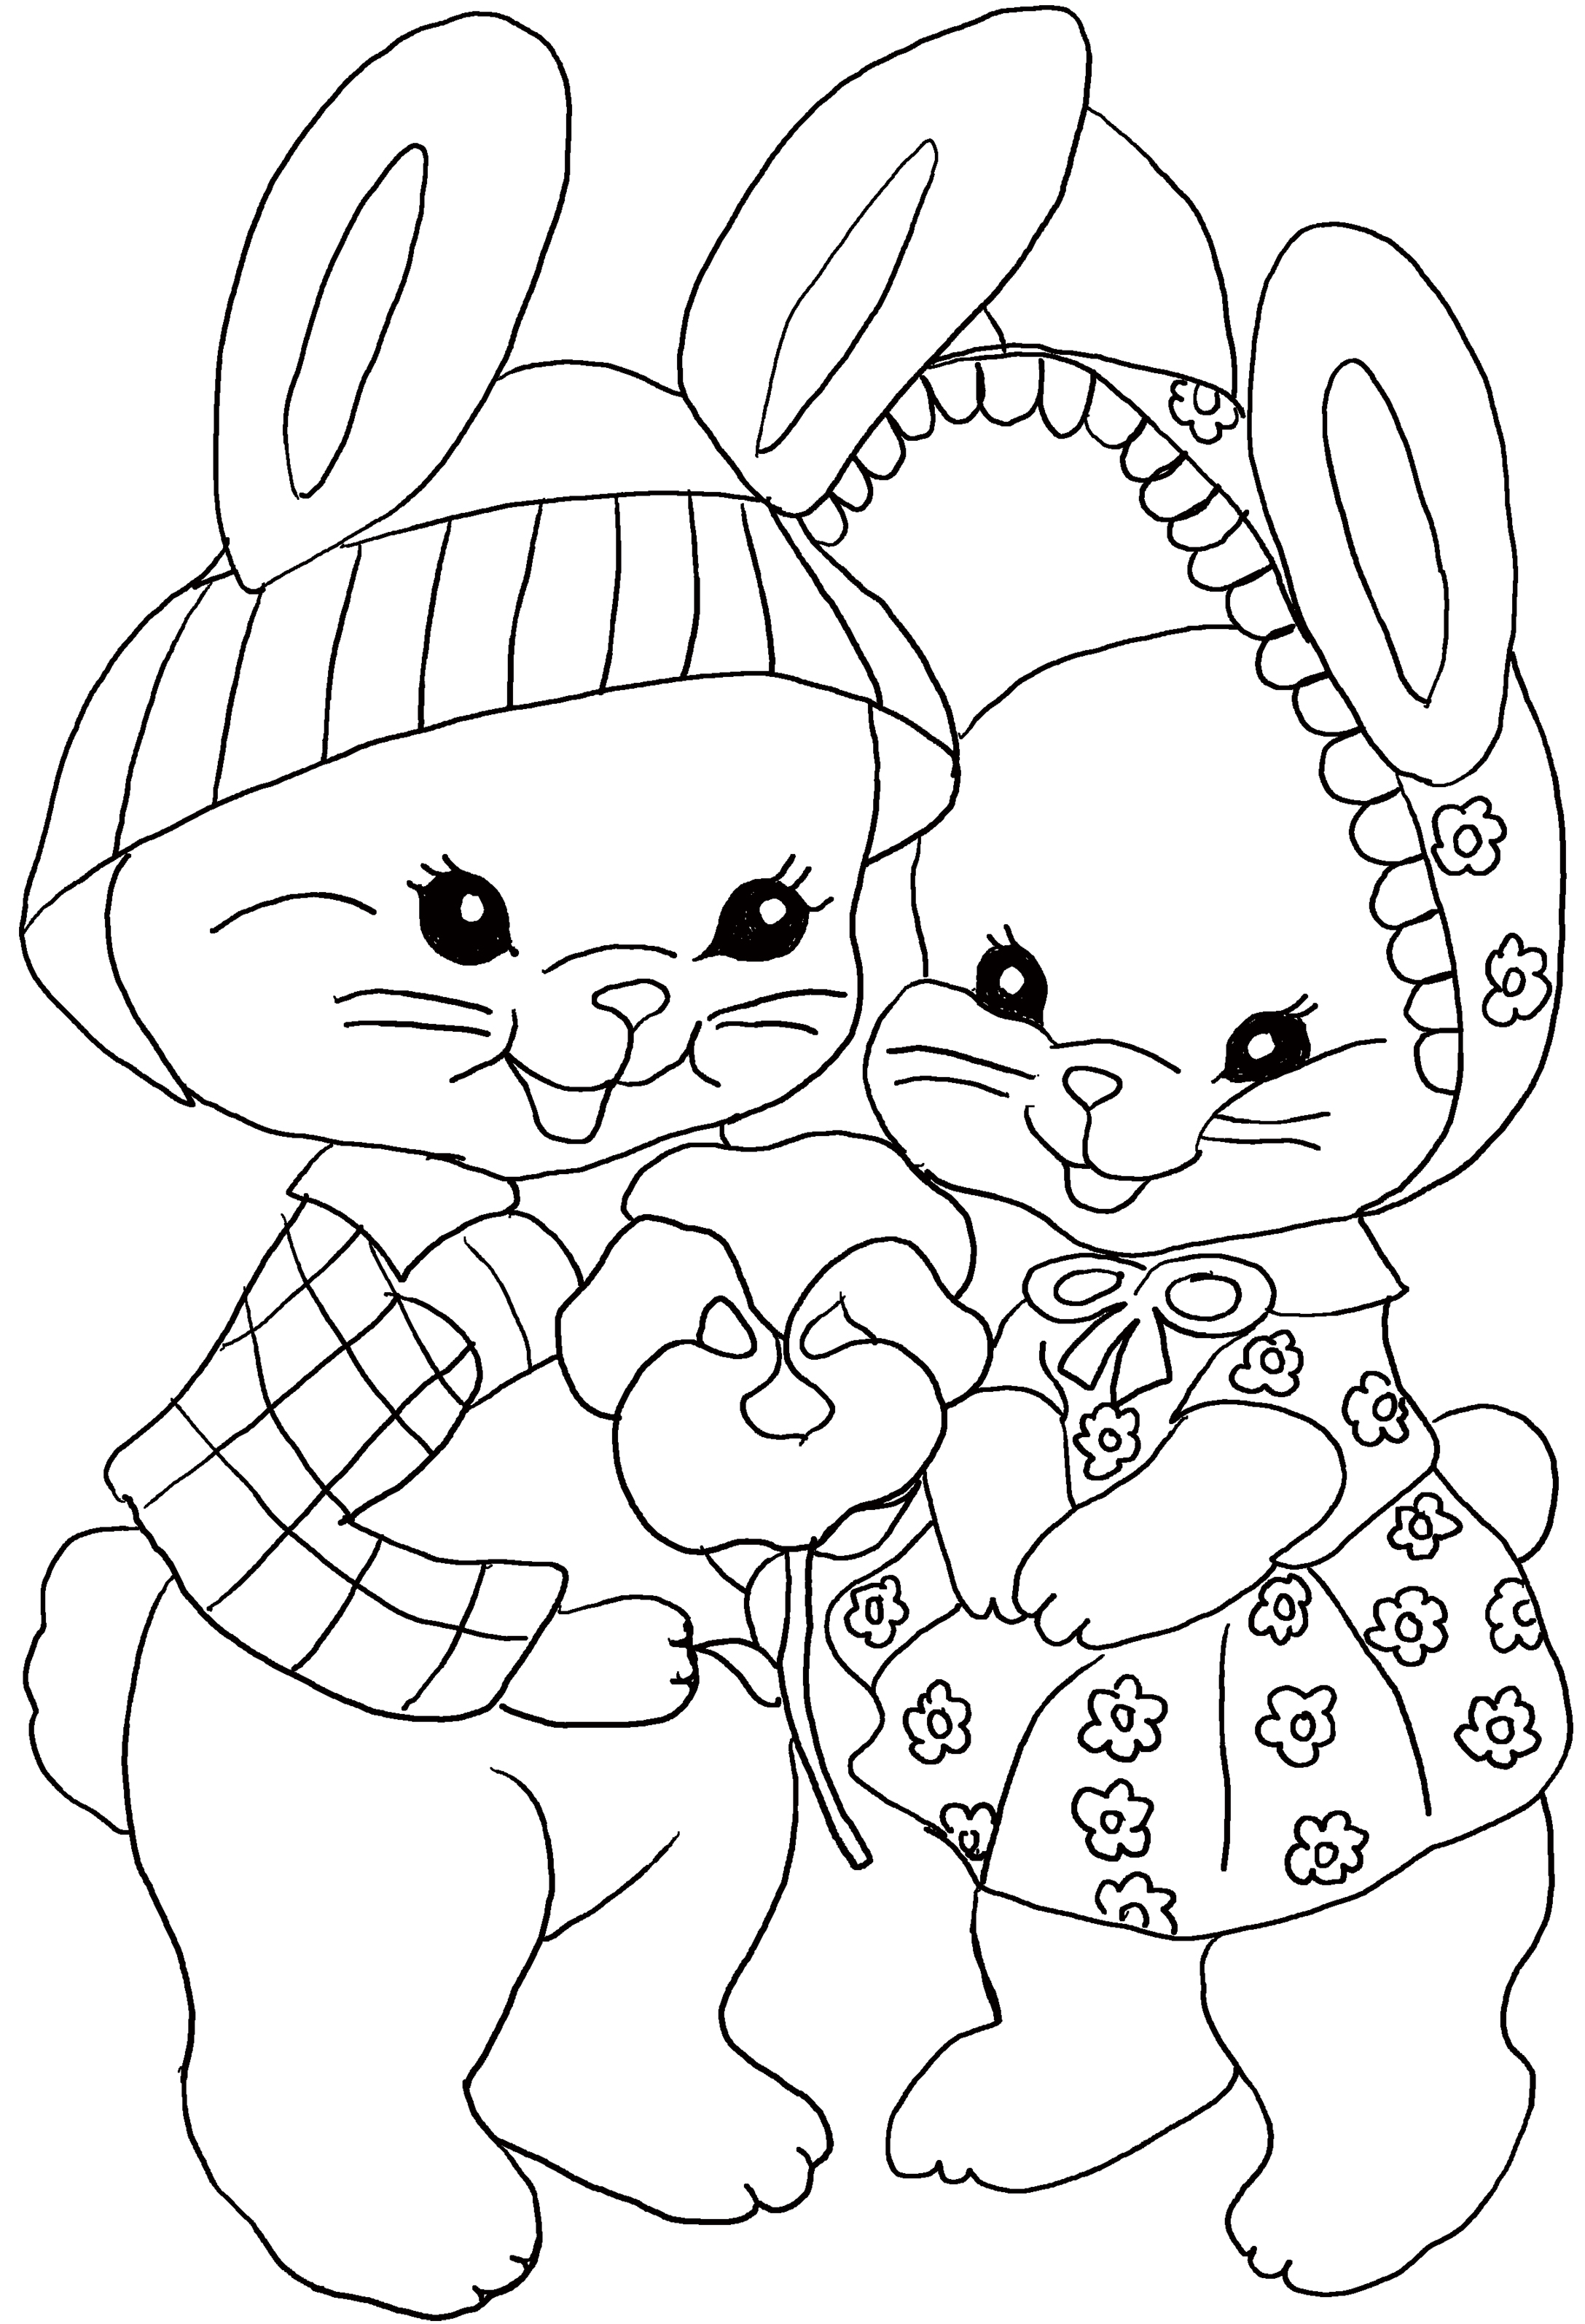 Sunny Bunnies Coloring Pages - Learny Kids